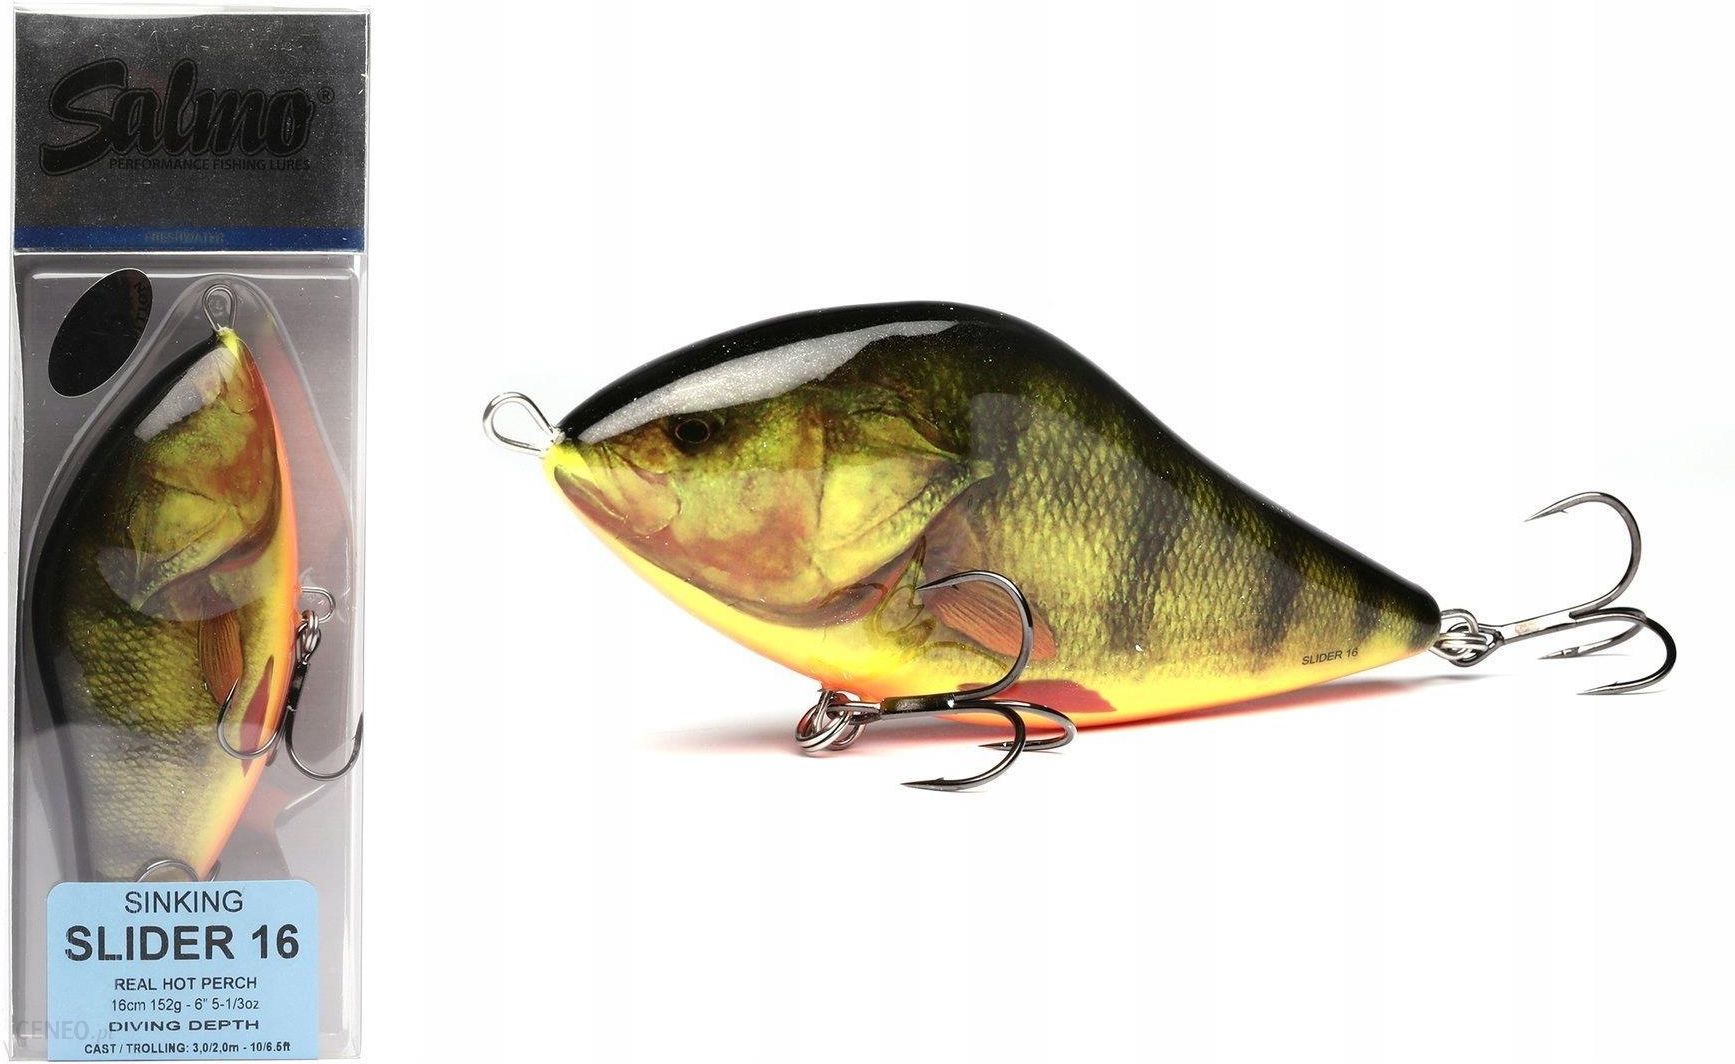 https://image.ceneostatic.pl/data/products/92933351/e3d7ec8e-a6d4-4bf2-b0d3-c376ba786545_i-salmo-slider-special-edition-real-hot-perch-16cm.jpg